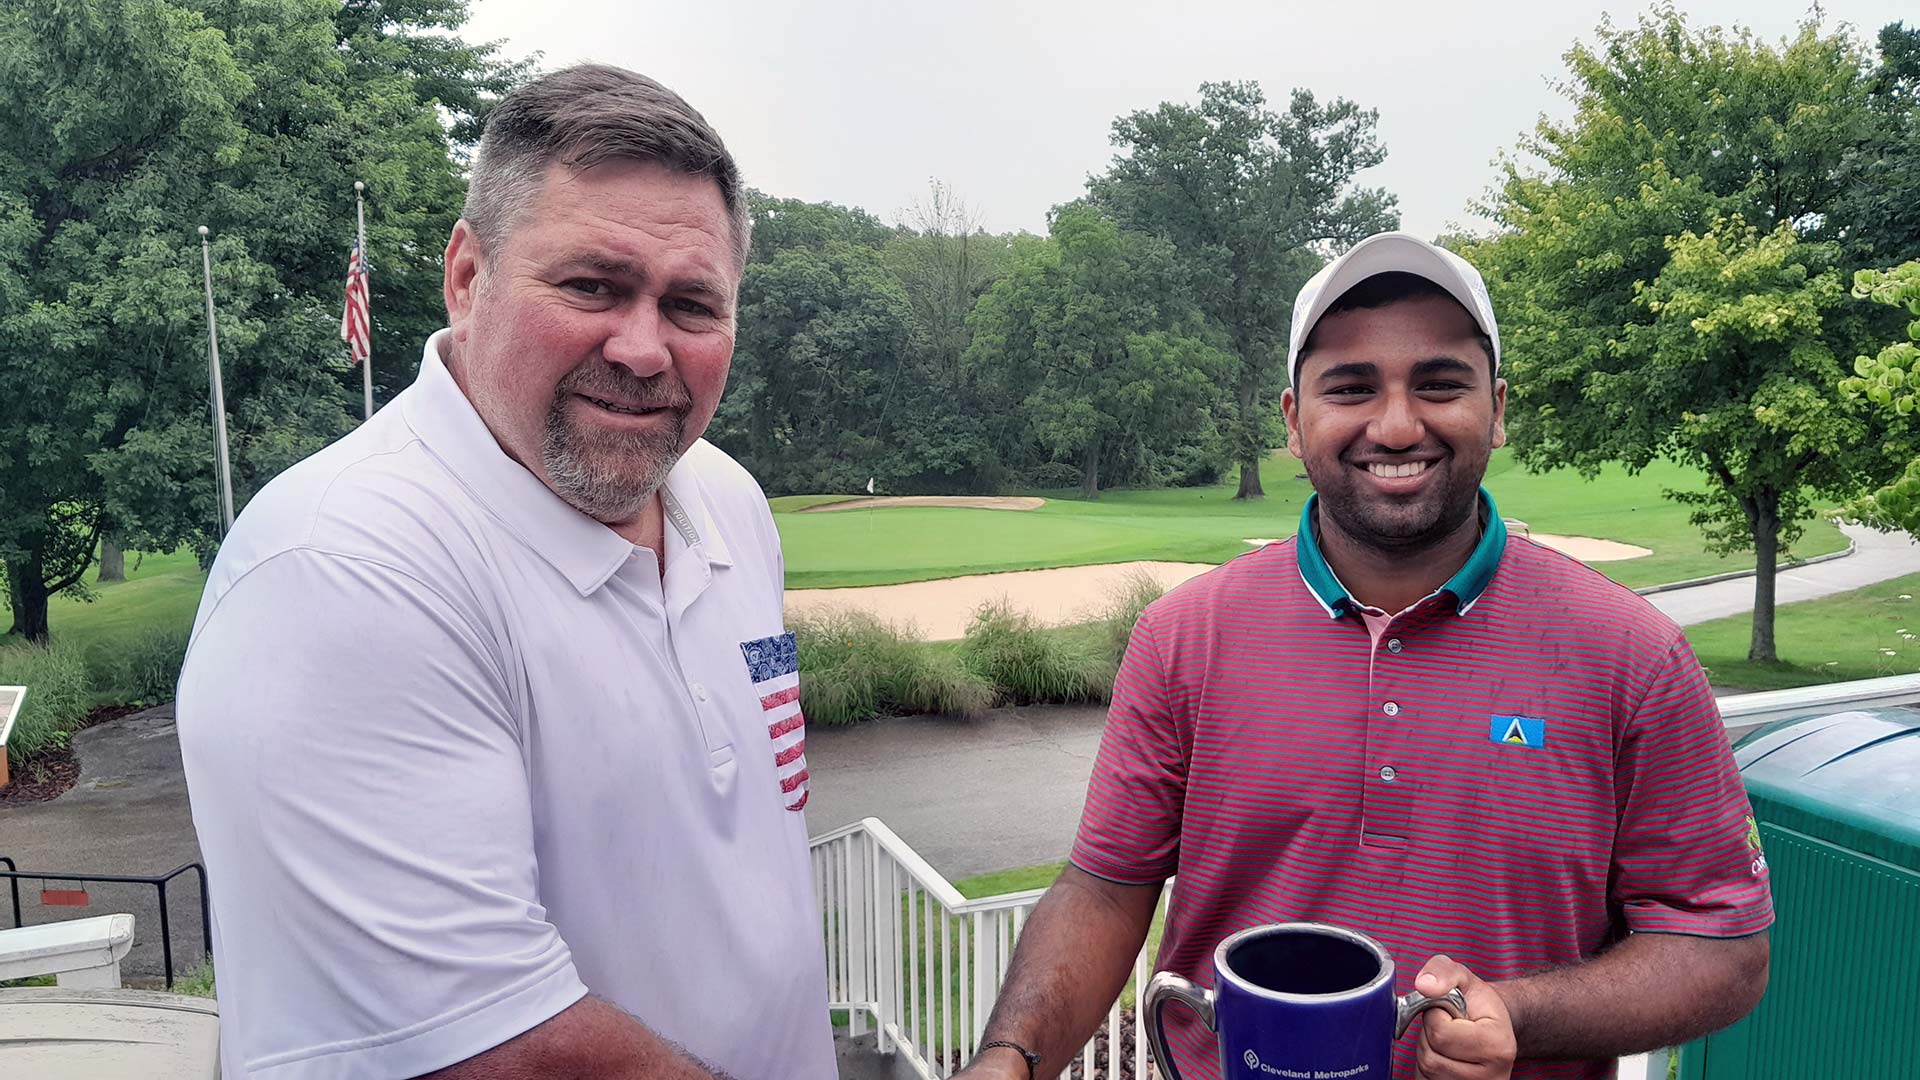 It-was-a-tough-day-on-the-course-at-the-Sleepy-Hollow-Championship!-The-rain-moved-in-around-11-a-m-and-never-stopped-No-player-shot-par-or-better-in-the-second-round-Yadhu-Urs-shot-a-second-consecutive-72-for-a-1.jpg